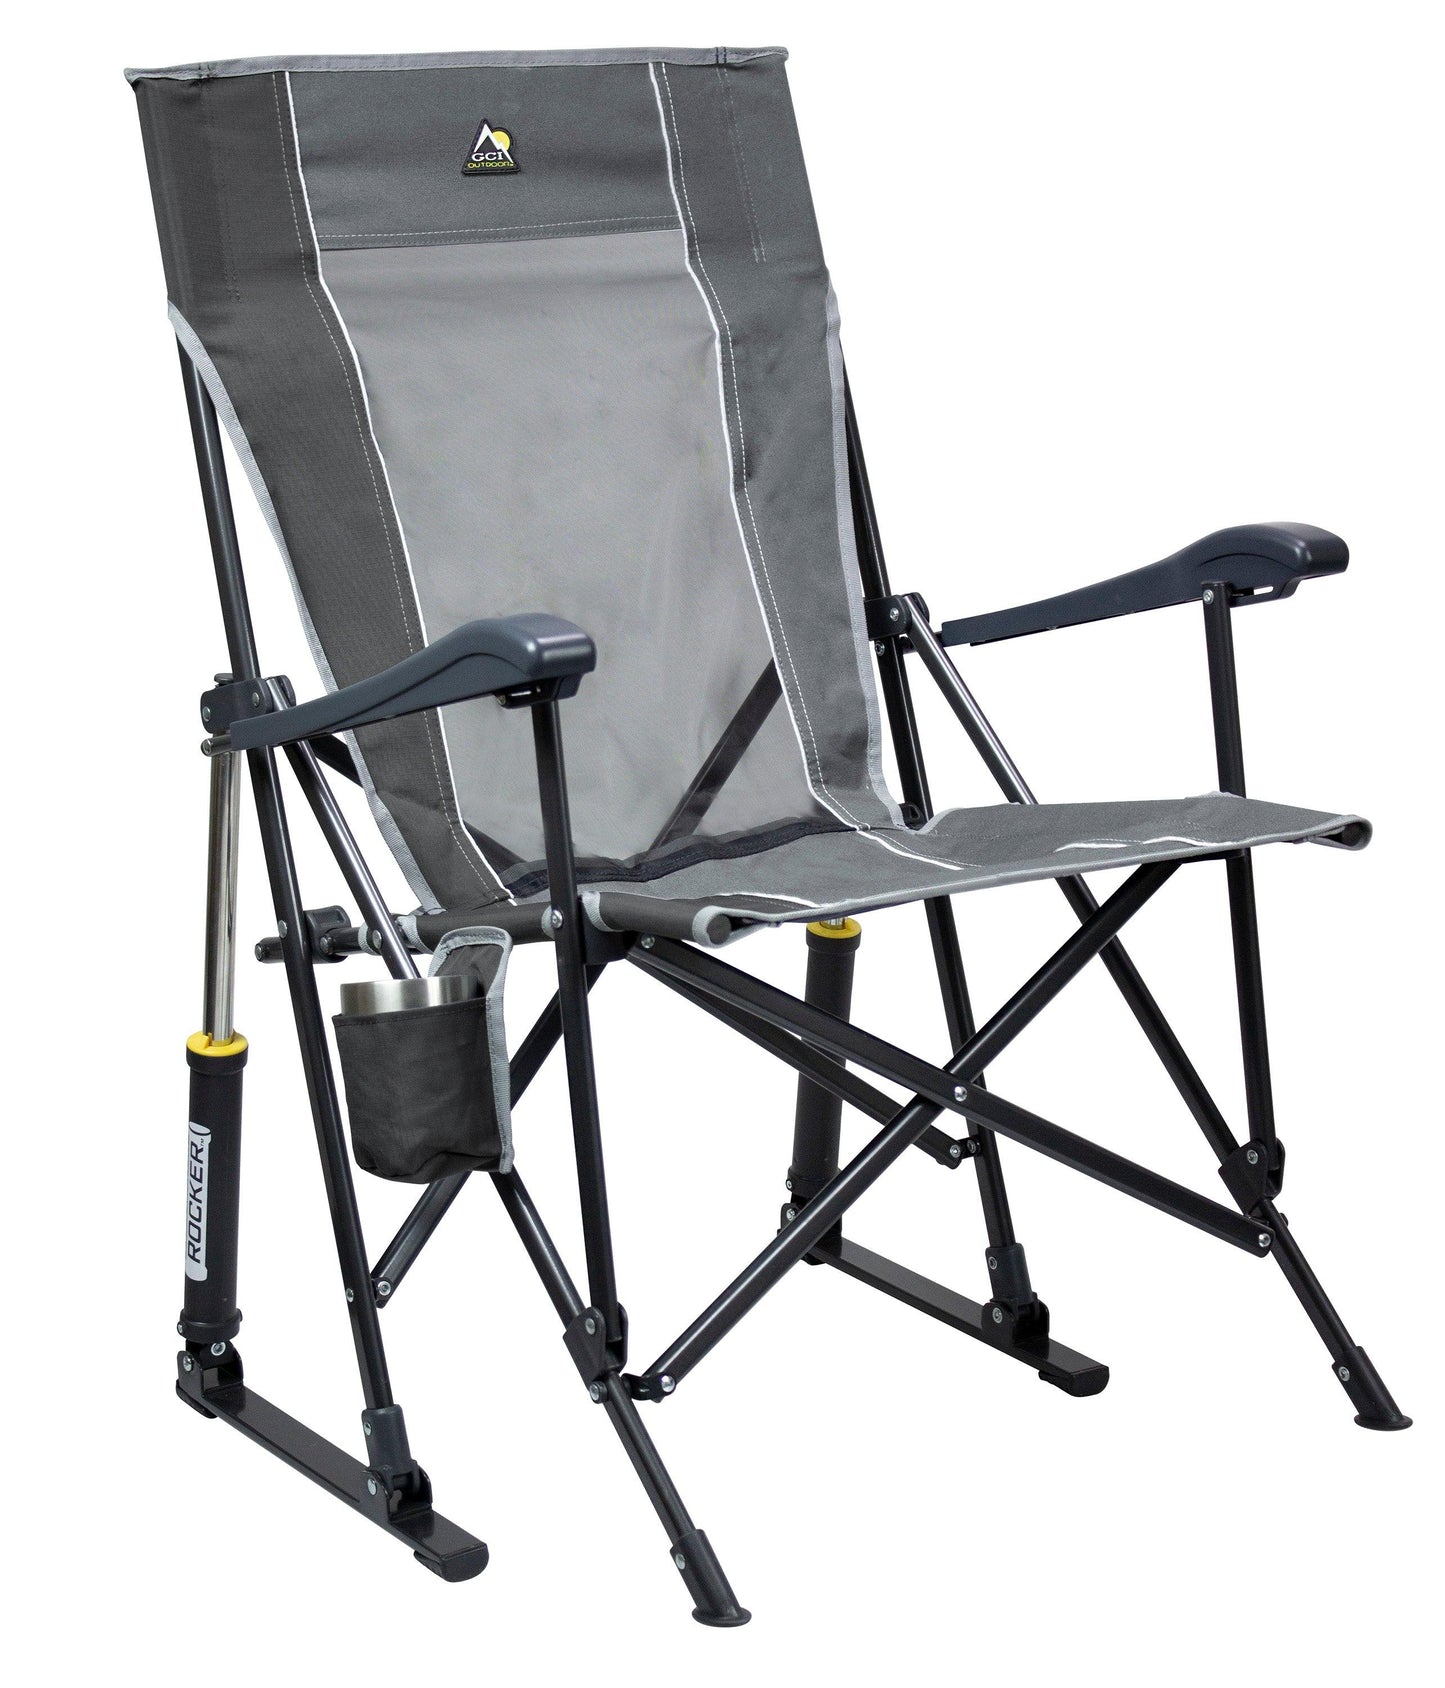 GCI Outdoor Roadtrip Rocker Collapsible Rocking Chair & Outdoor Camping Chair